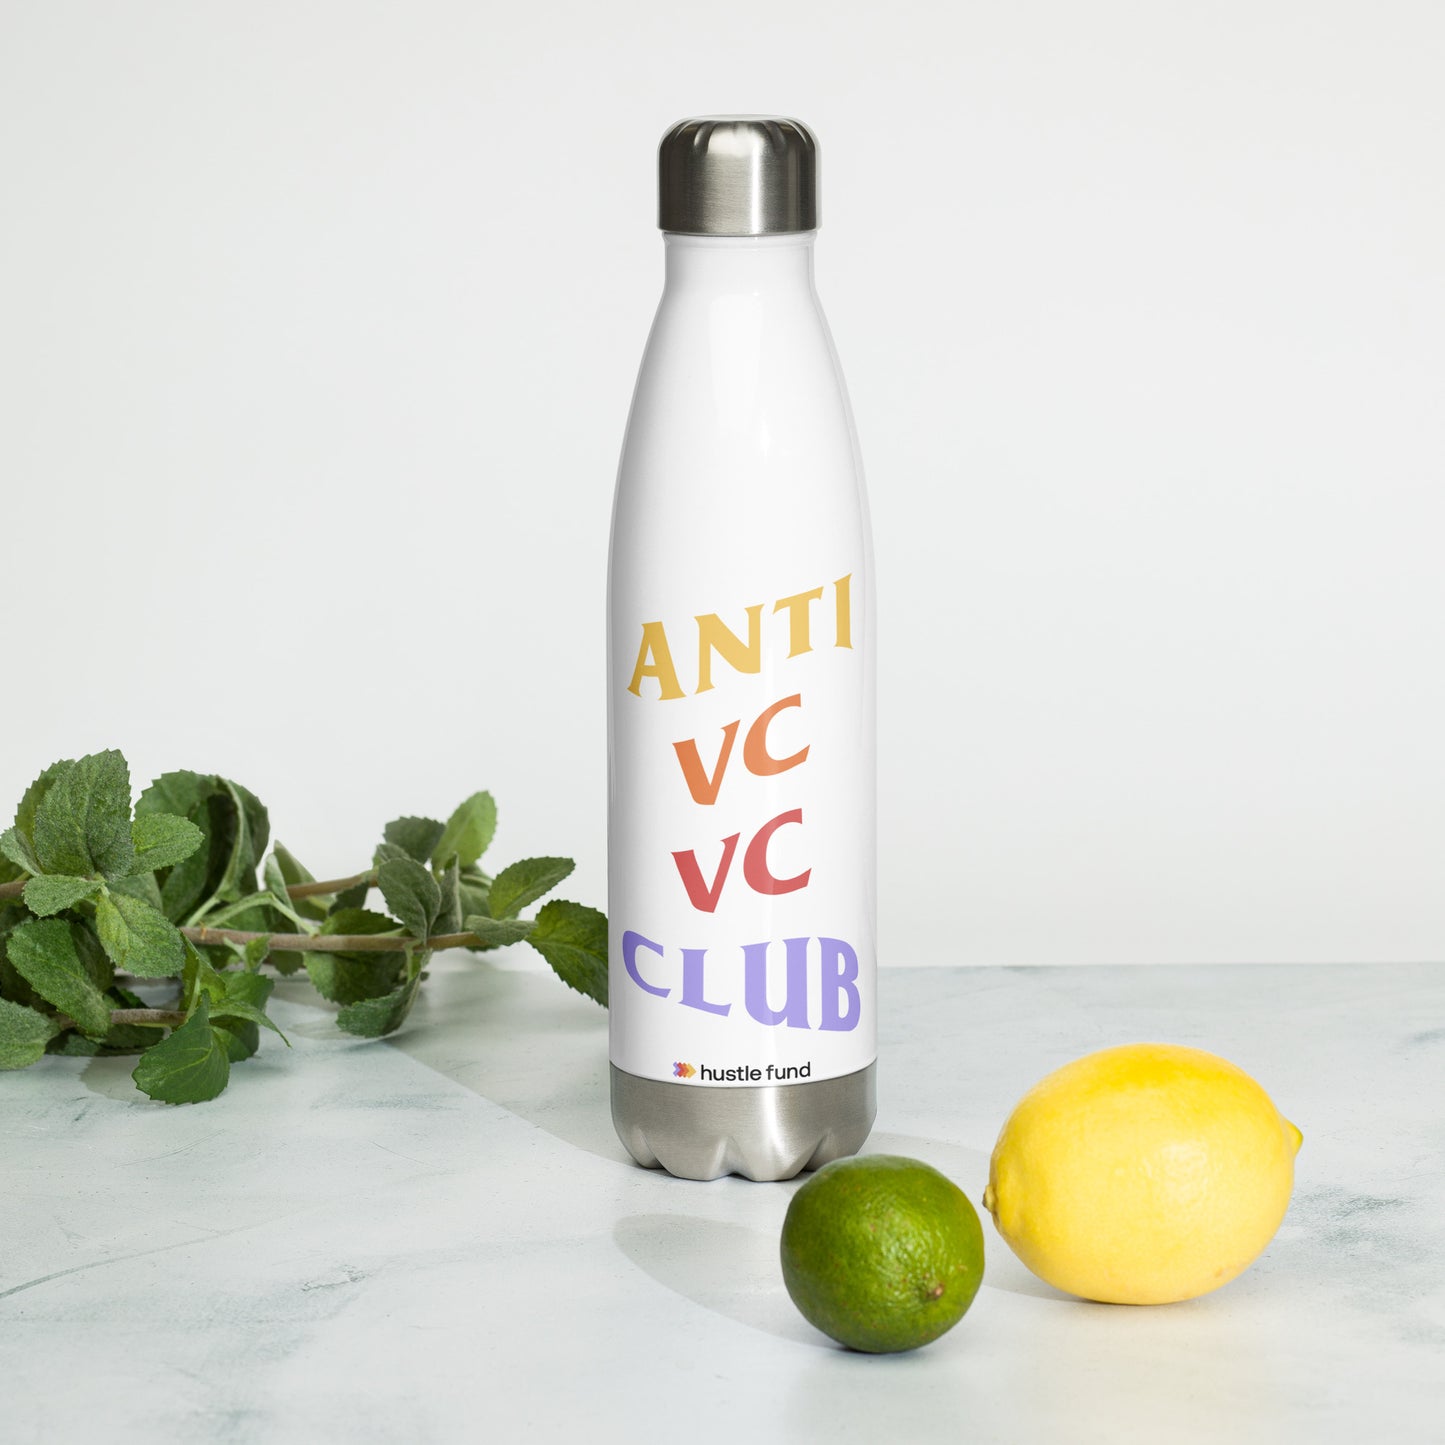 Anti VC VC Club Stainless Steel Water Bottle